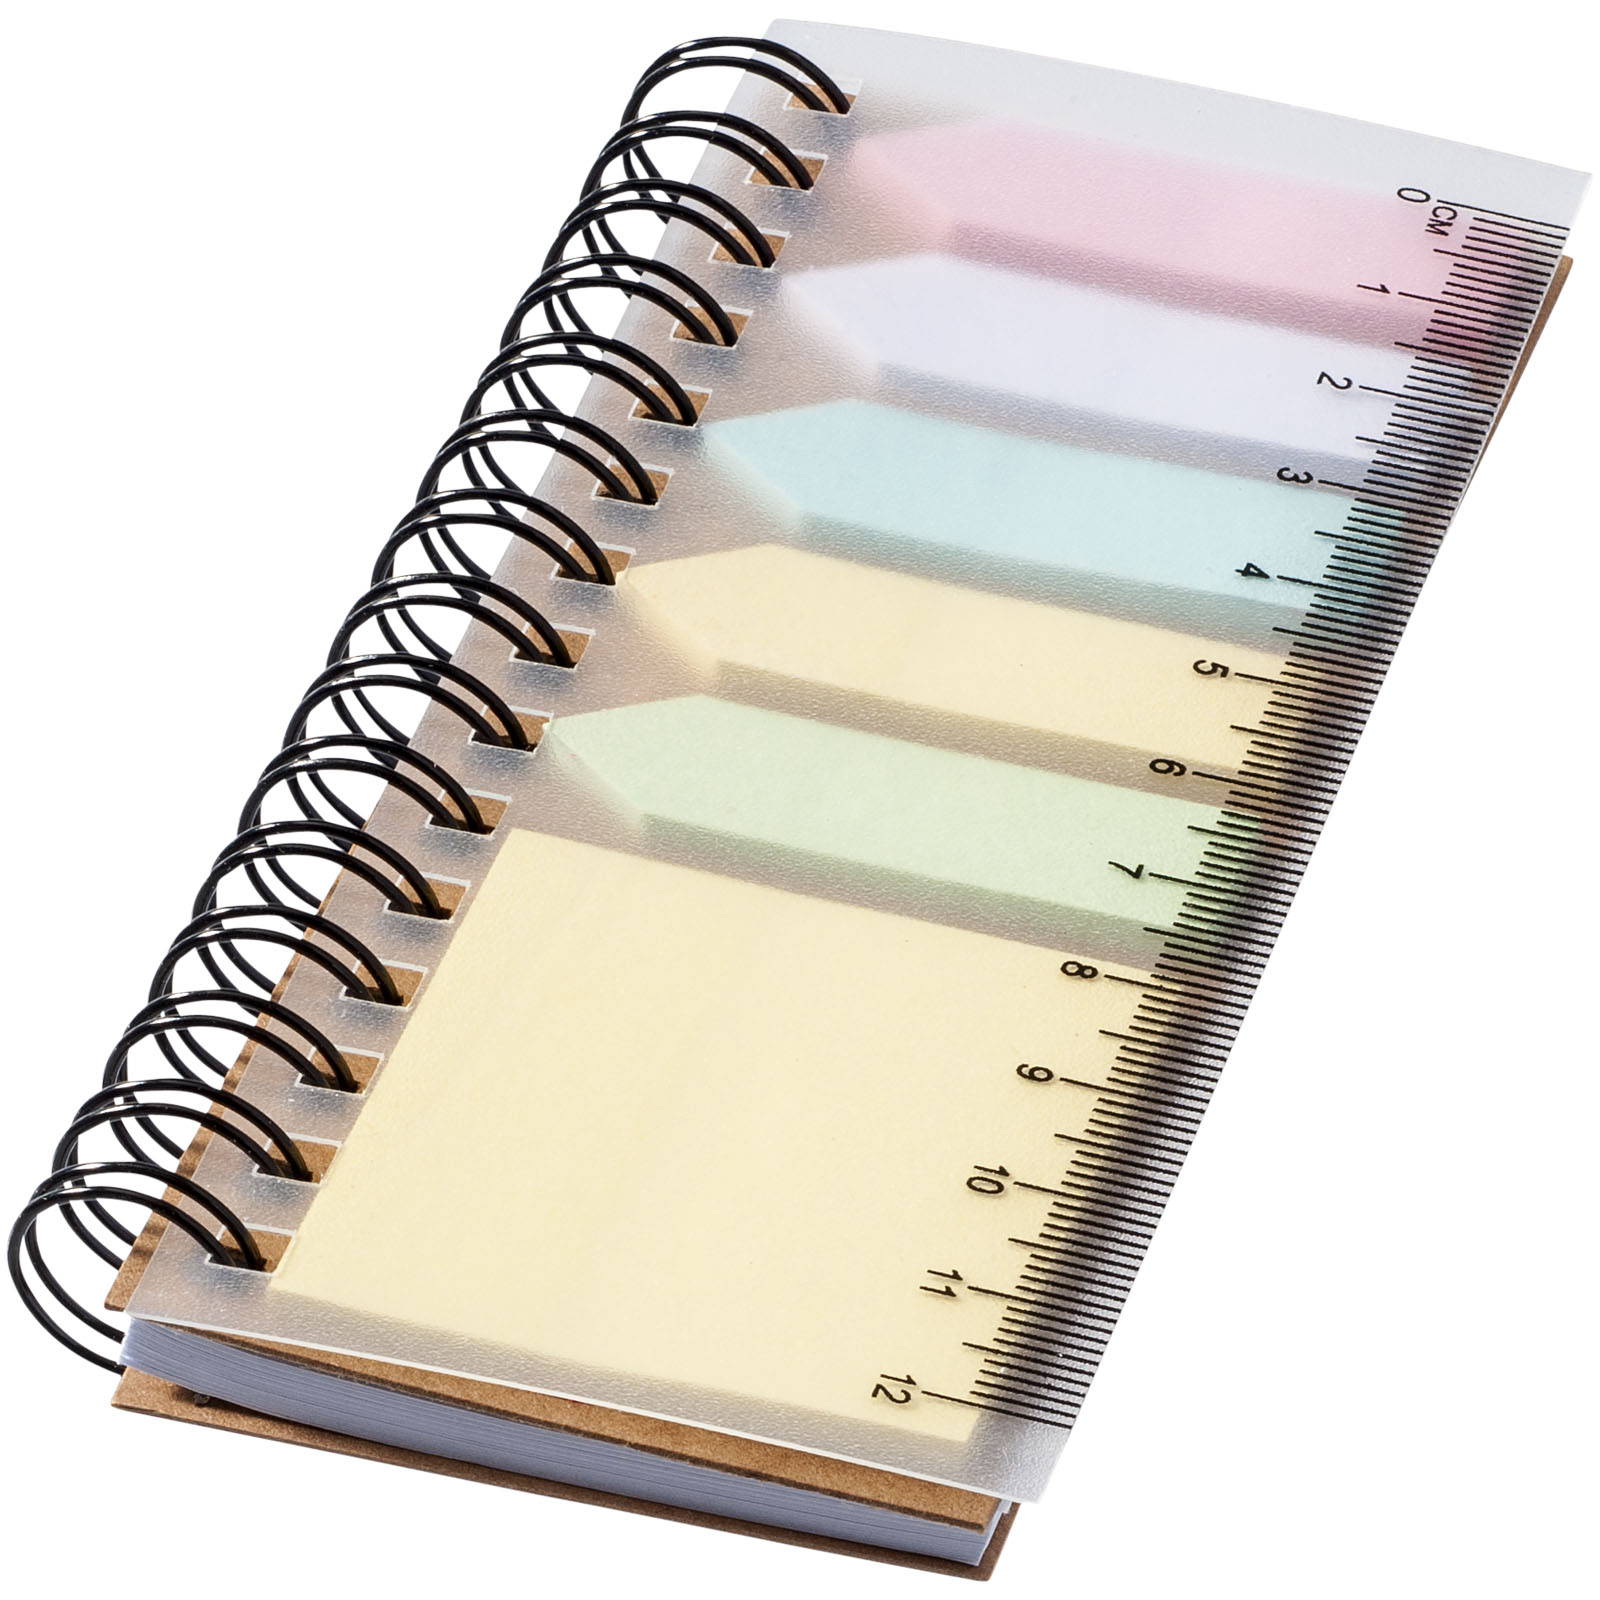 Notebooks & Desk Essentials - Spinner spiral notebook with coloured sticky notes